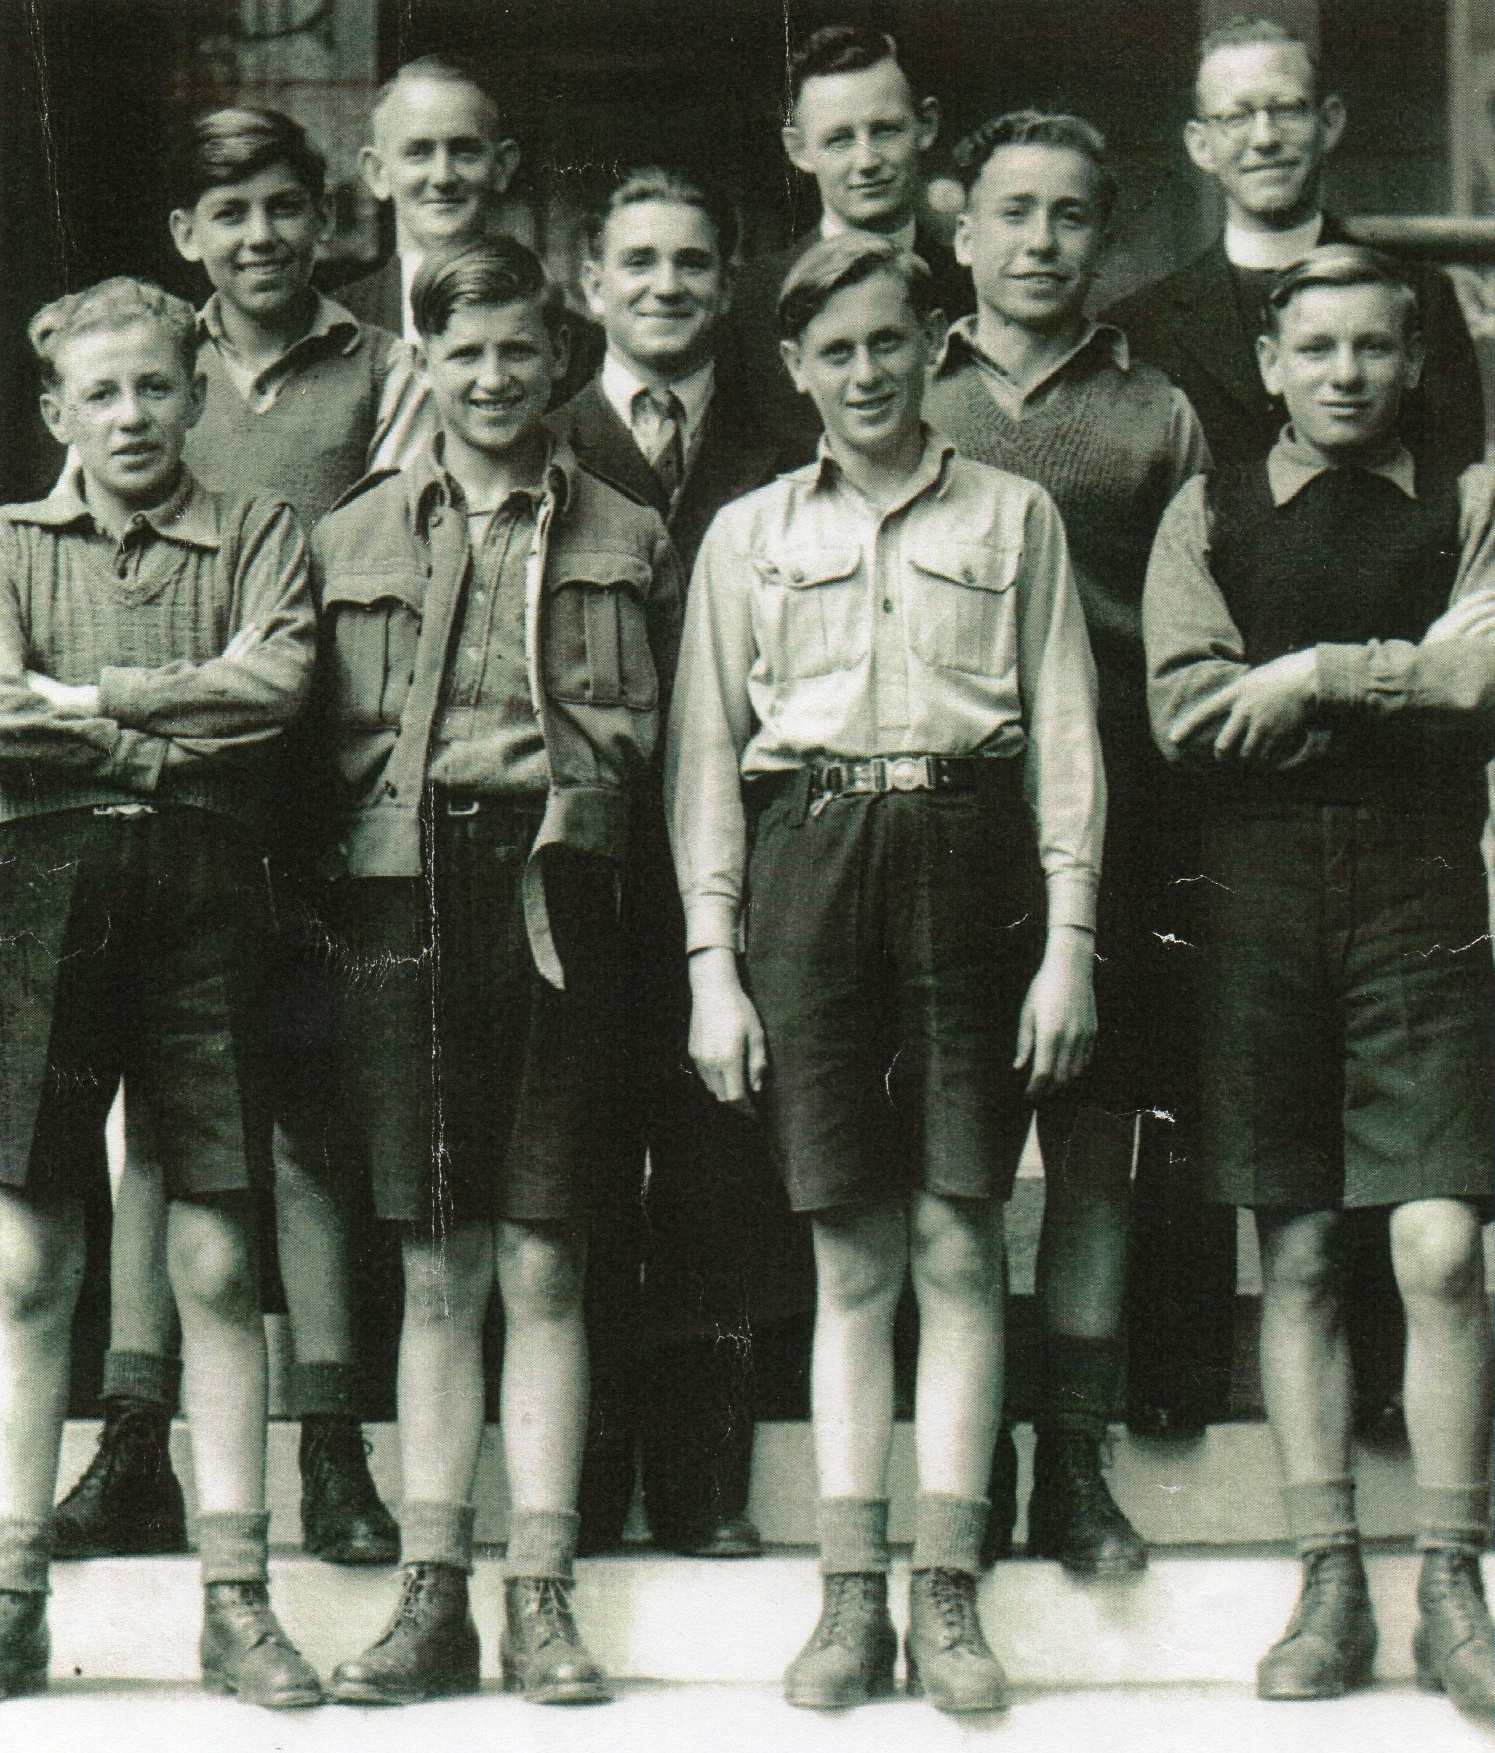 The seven Polish boys 
standing on steps with the three teachers behind. All smiling.